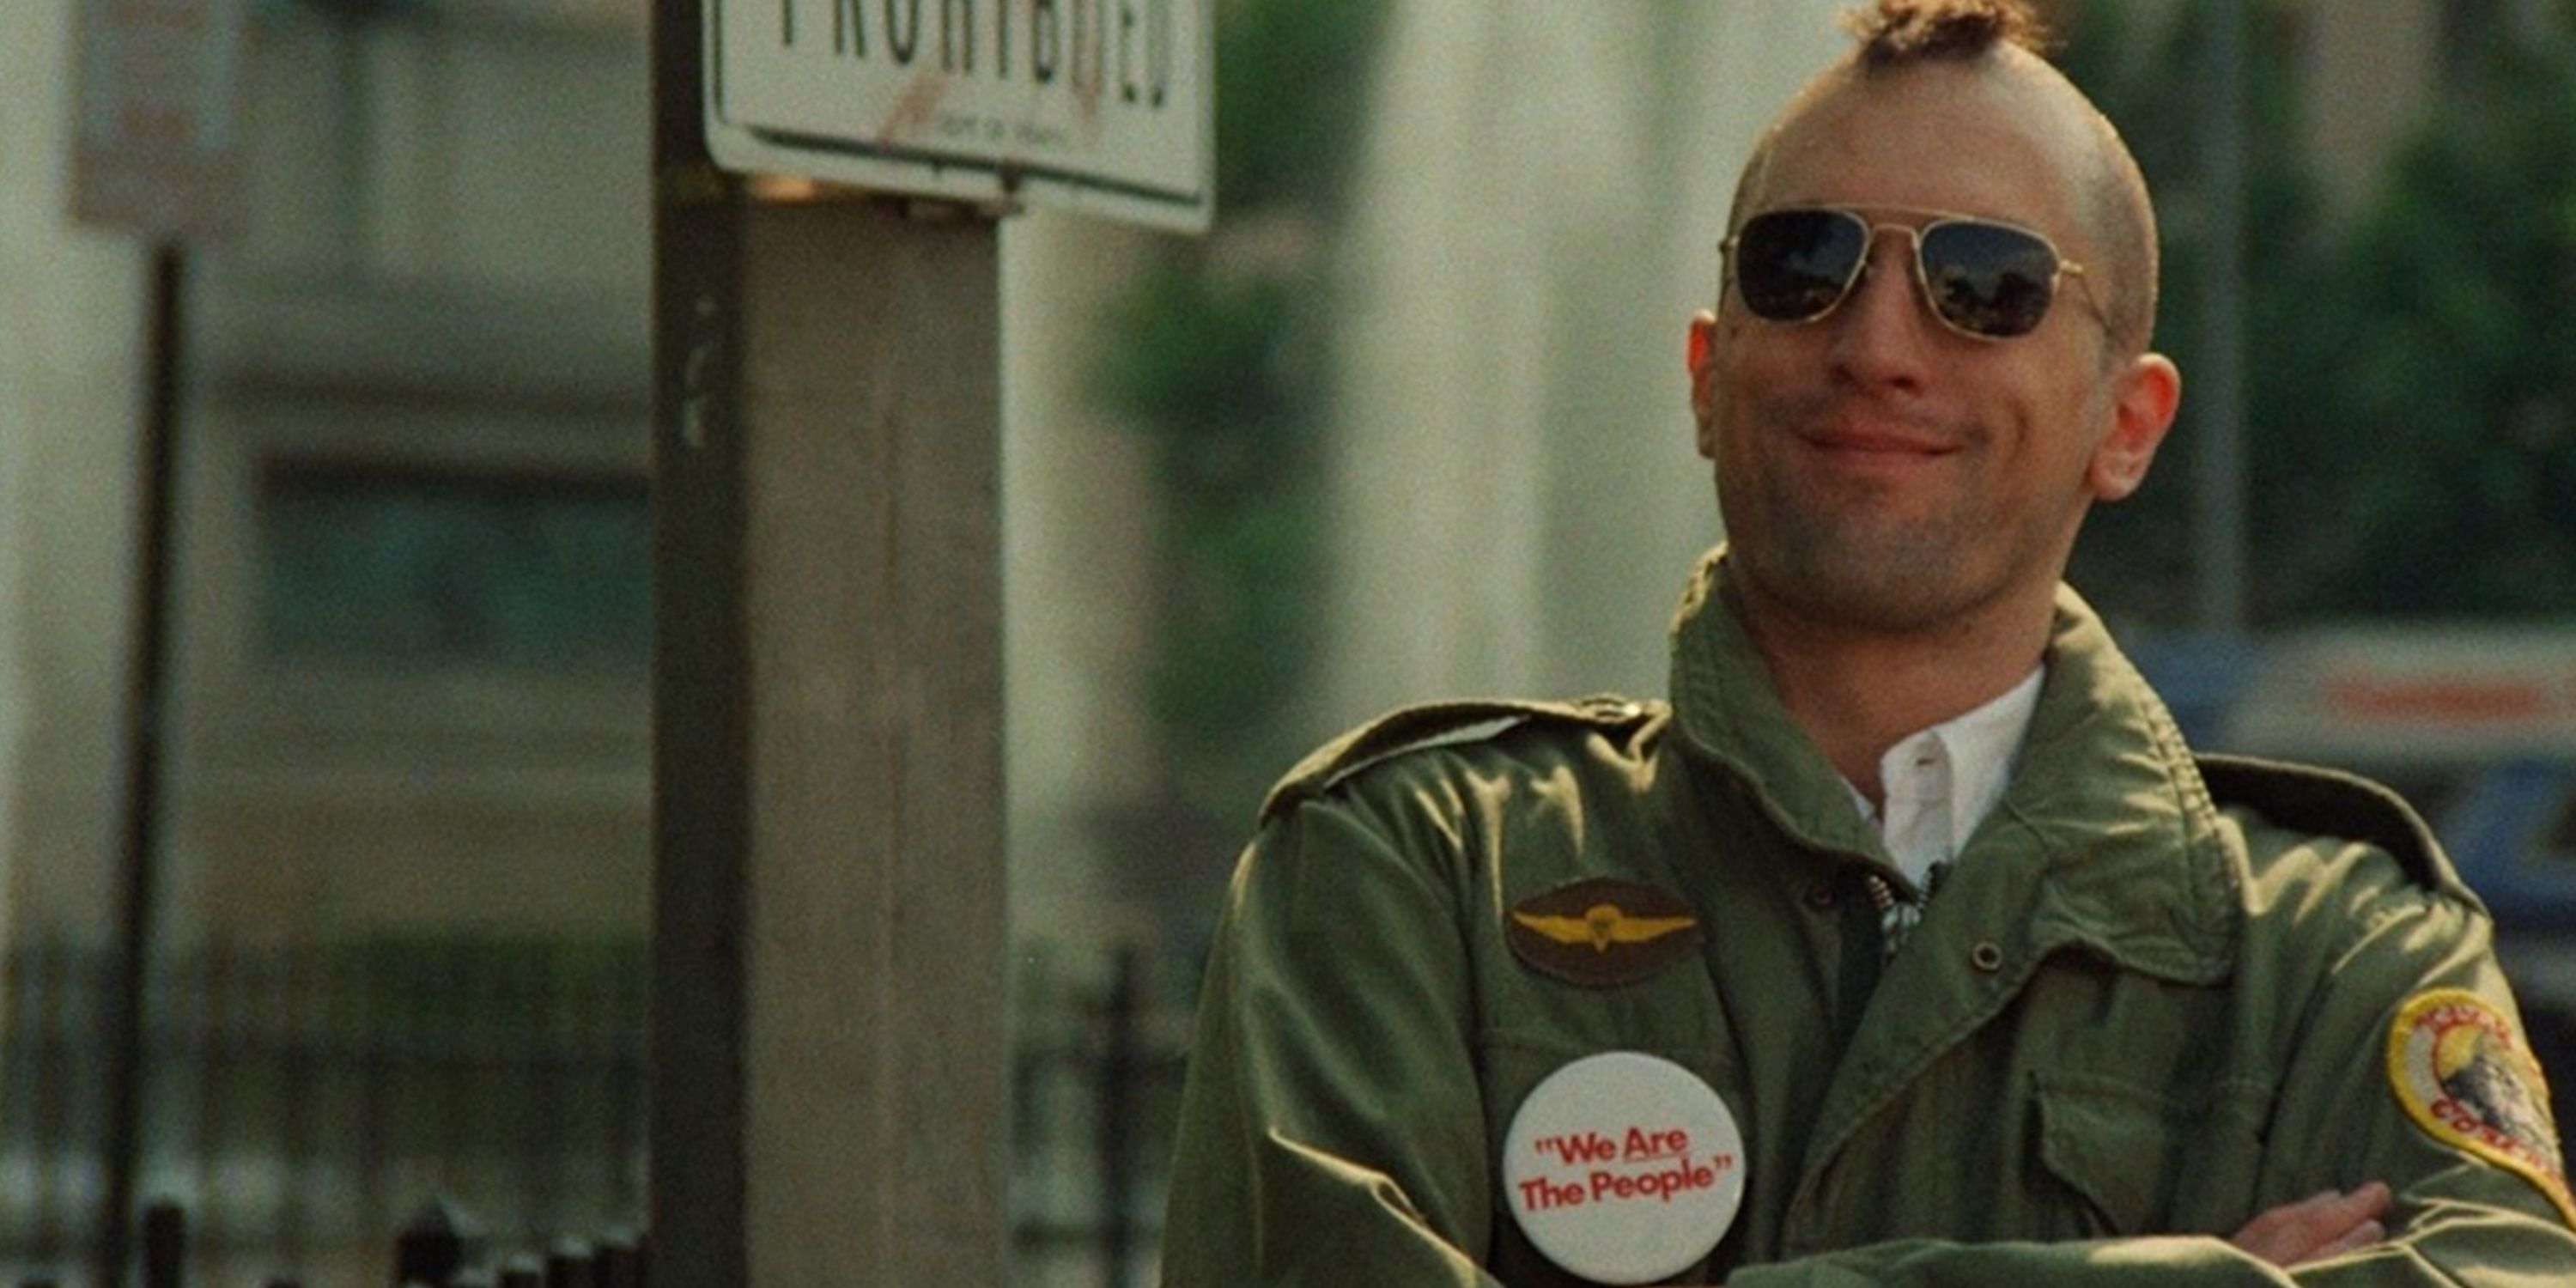 10 Scorsese Trademarks In Taxi Driver